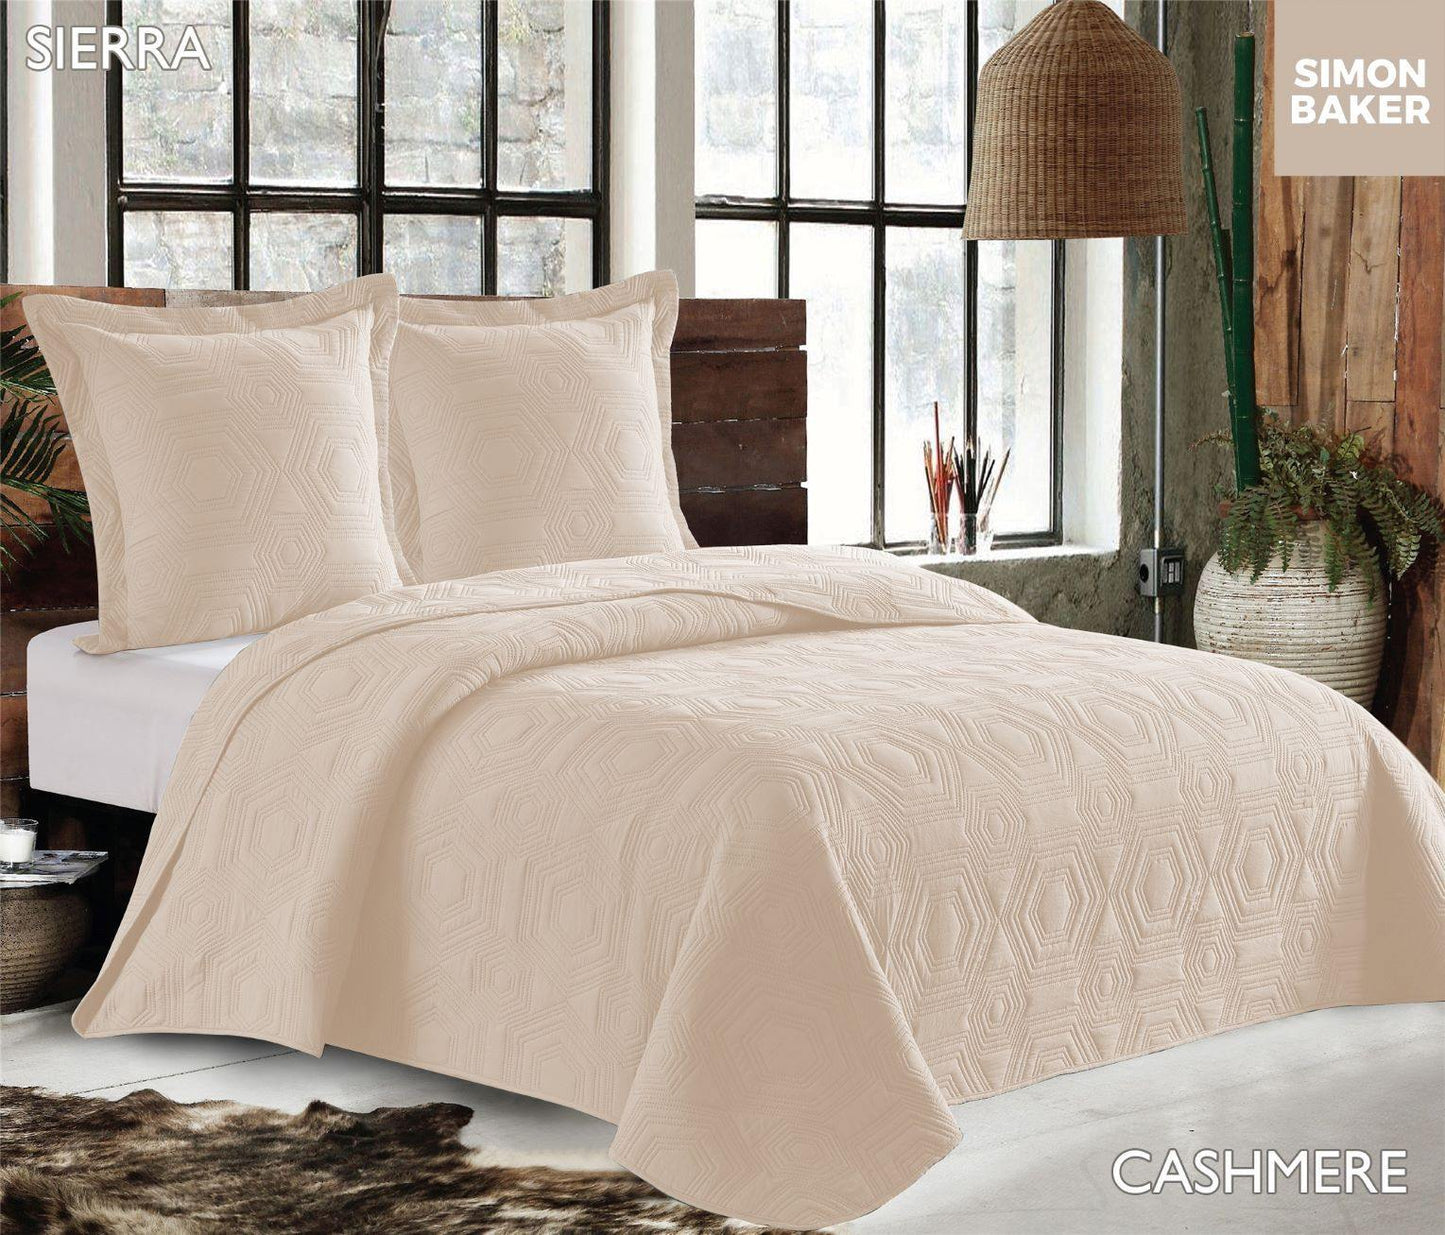 Simon Baker | Sierra Quilted Bedspread Cashmere (Various Sizes)